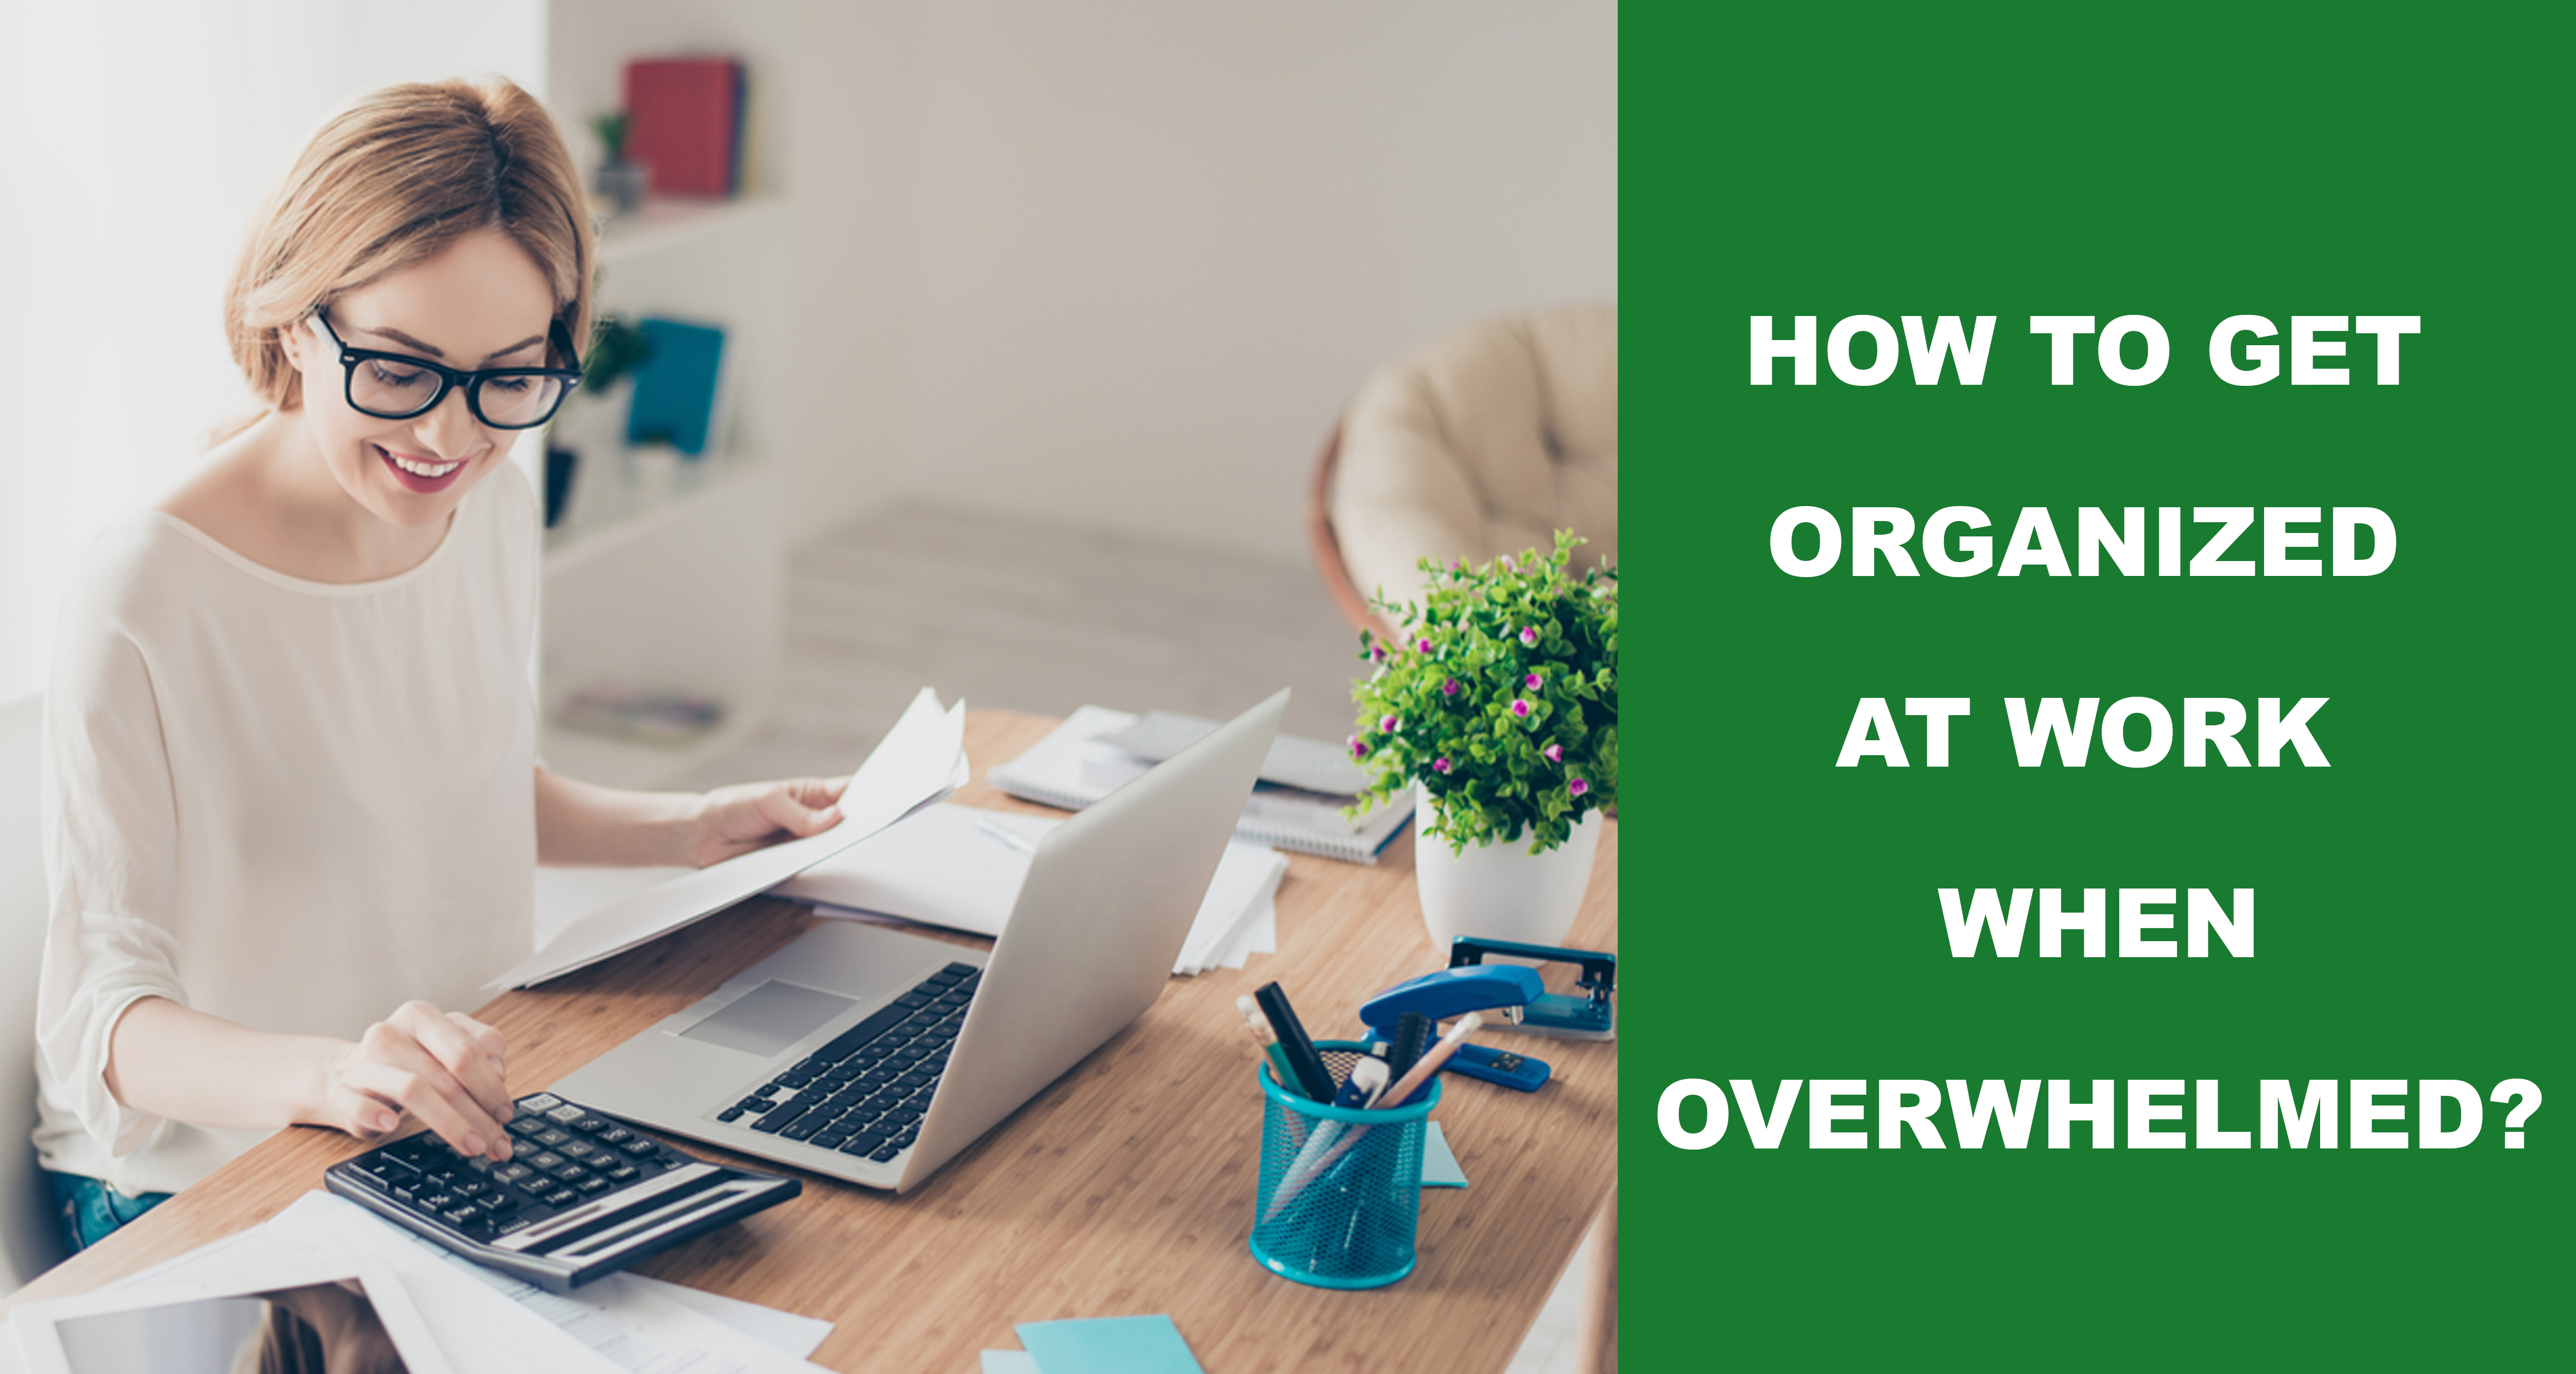 How To Get Organized At Work When Overwhelmed